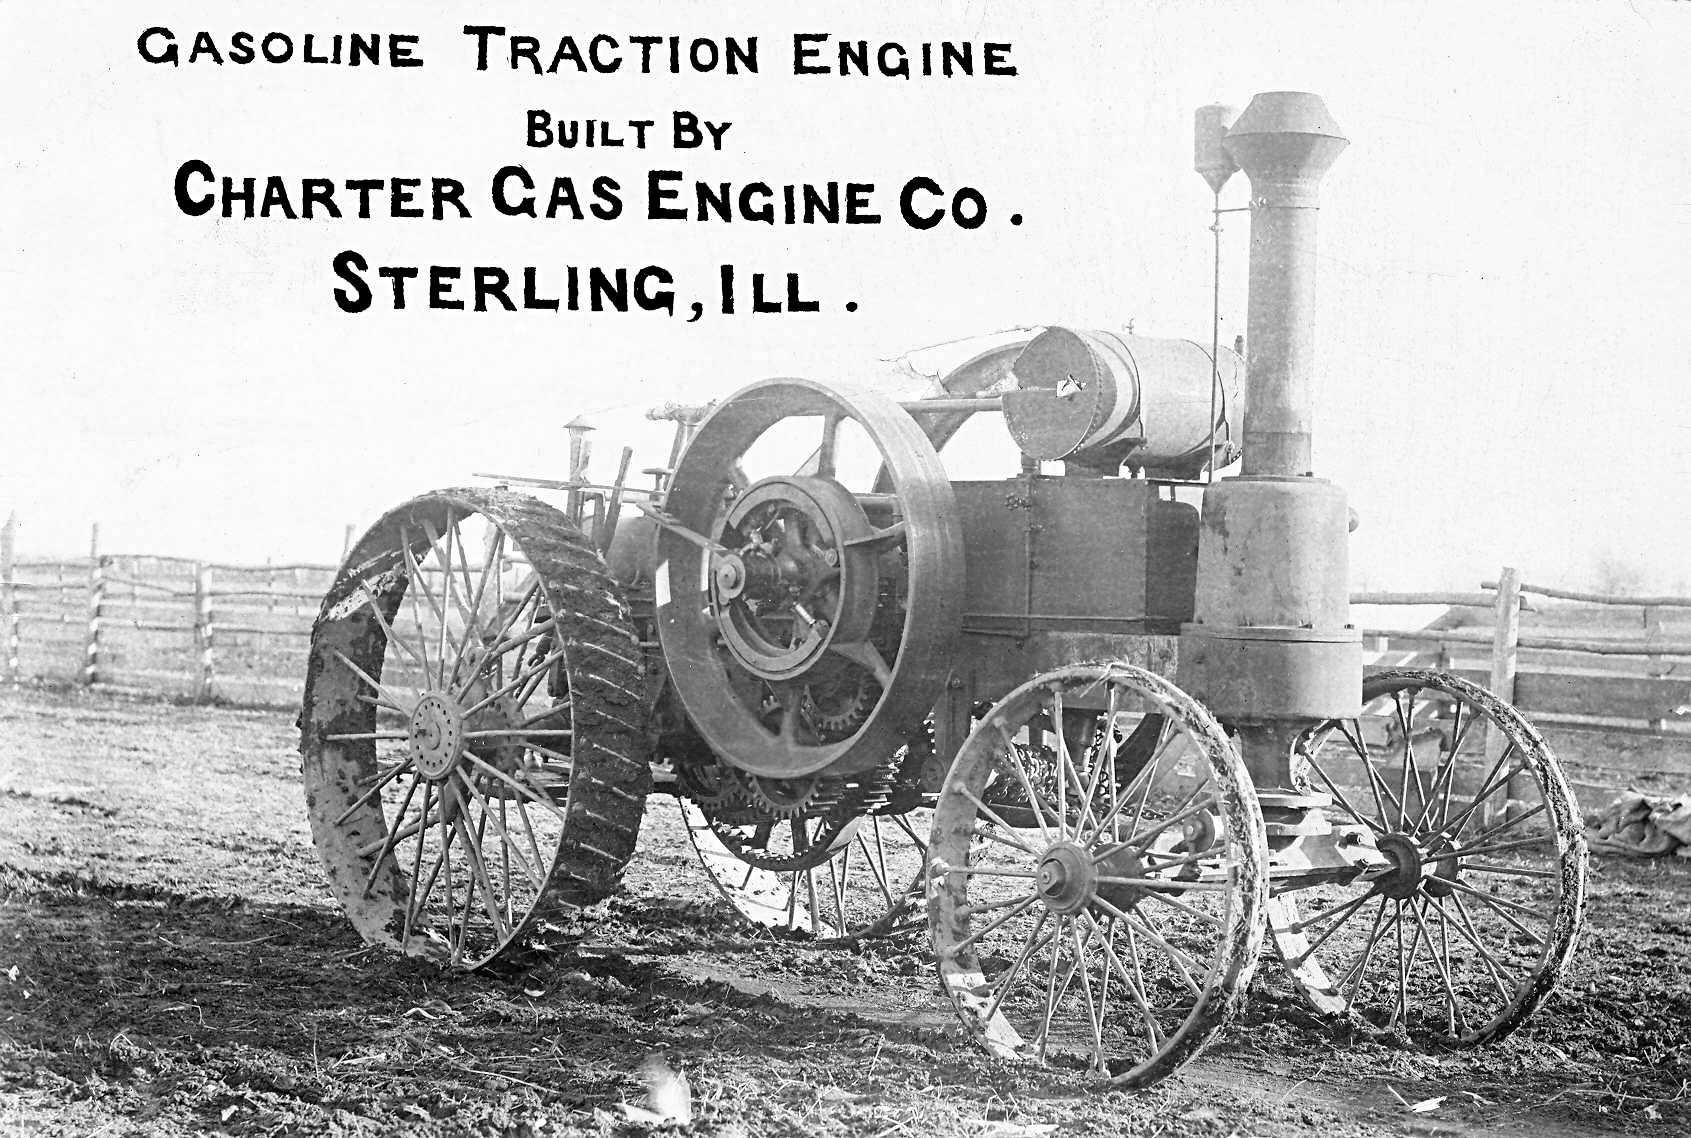 charter / sterling tractor